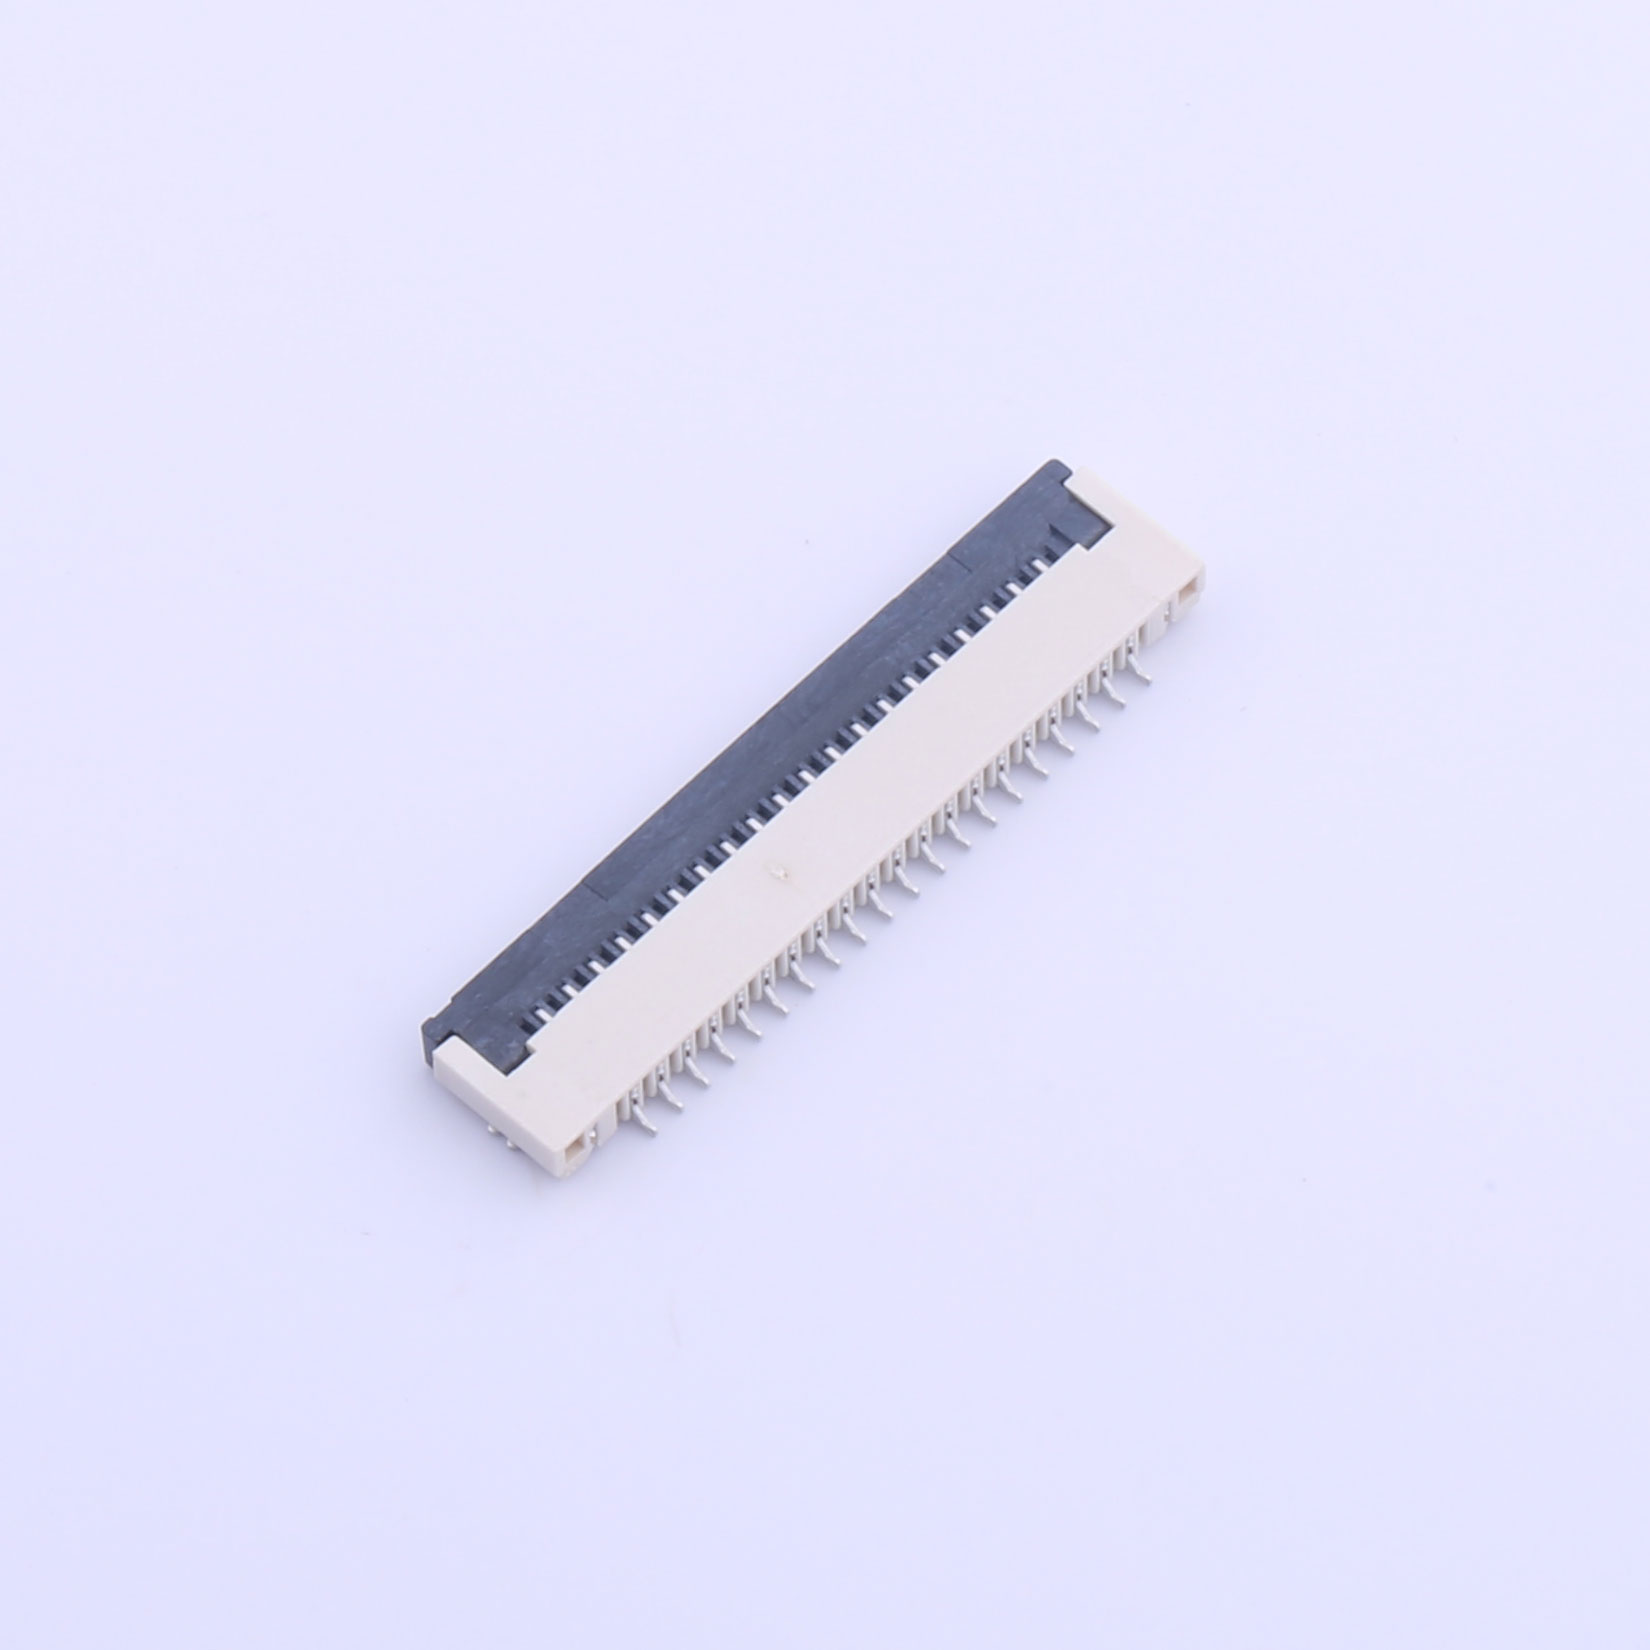 Kinghelm Pitch 1mm FFC/FPC Connector 20p - KH-FG1.0-H2.0-20pin